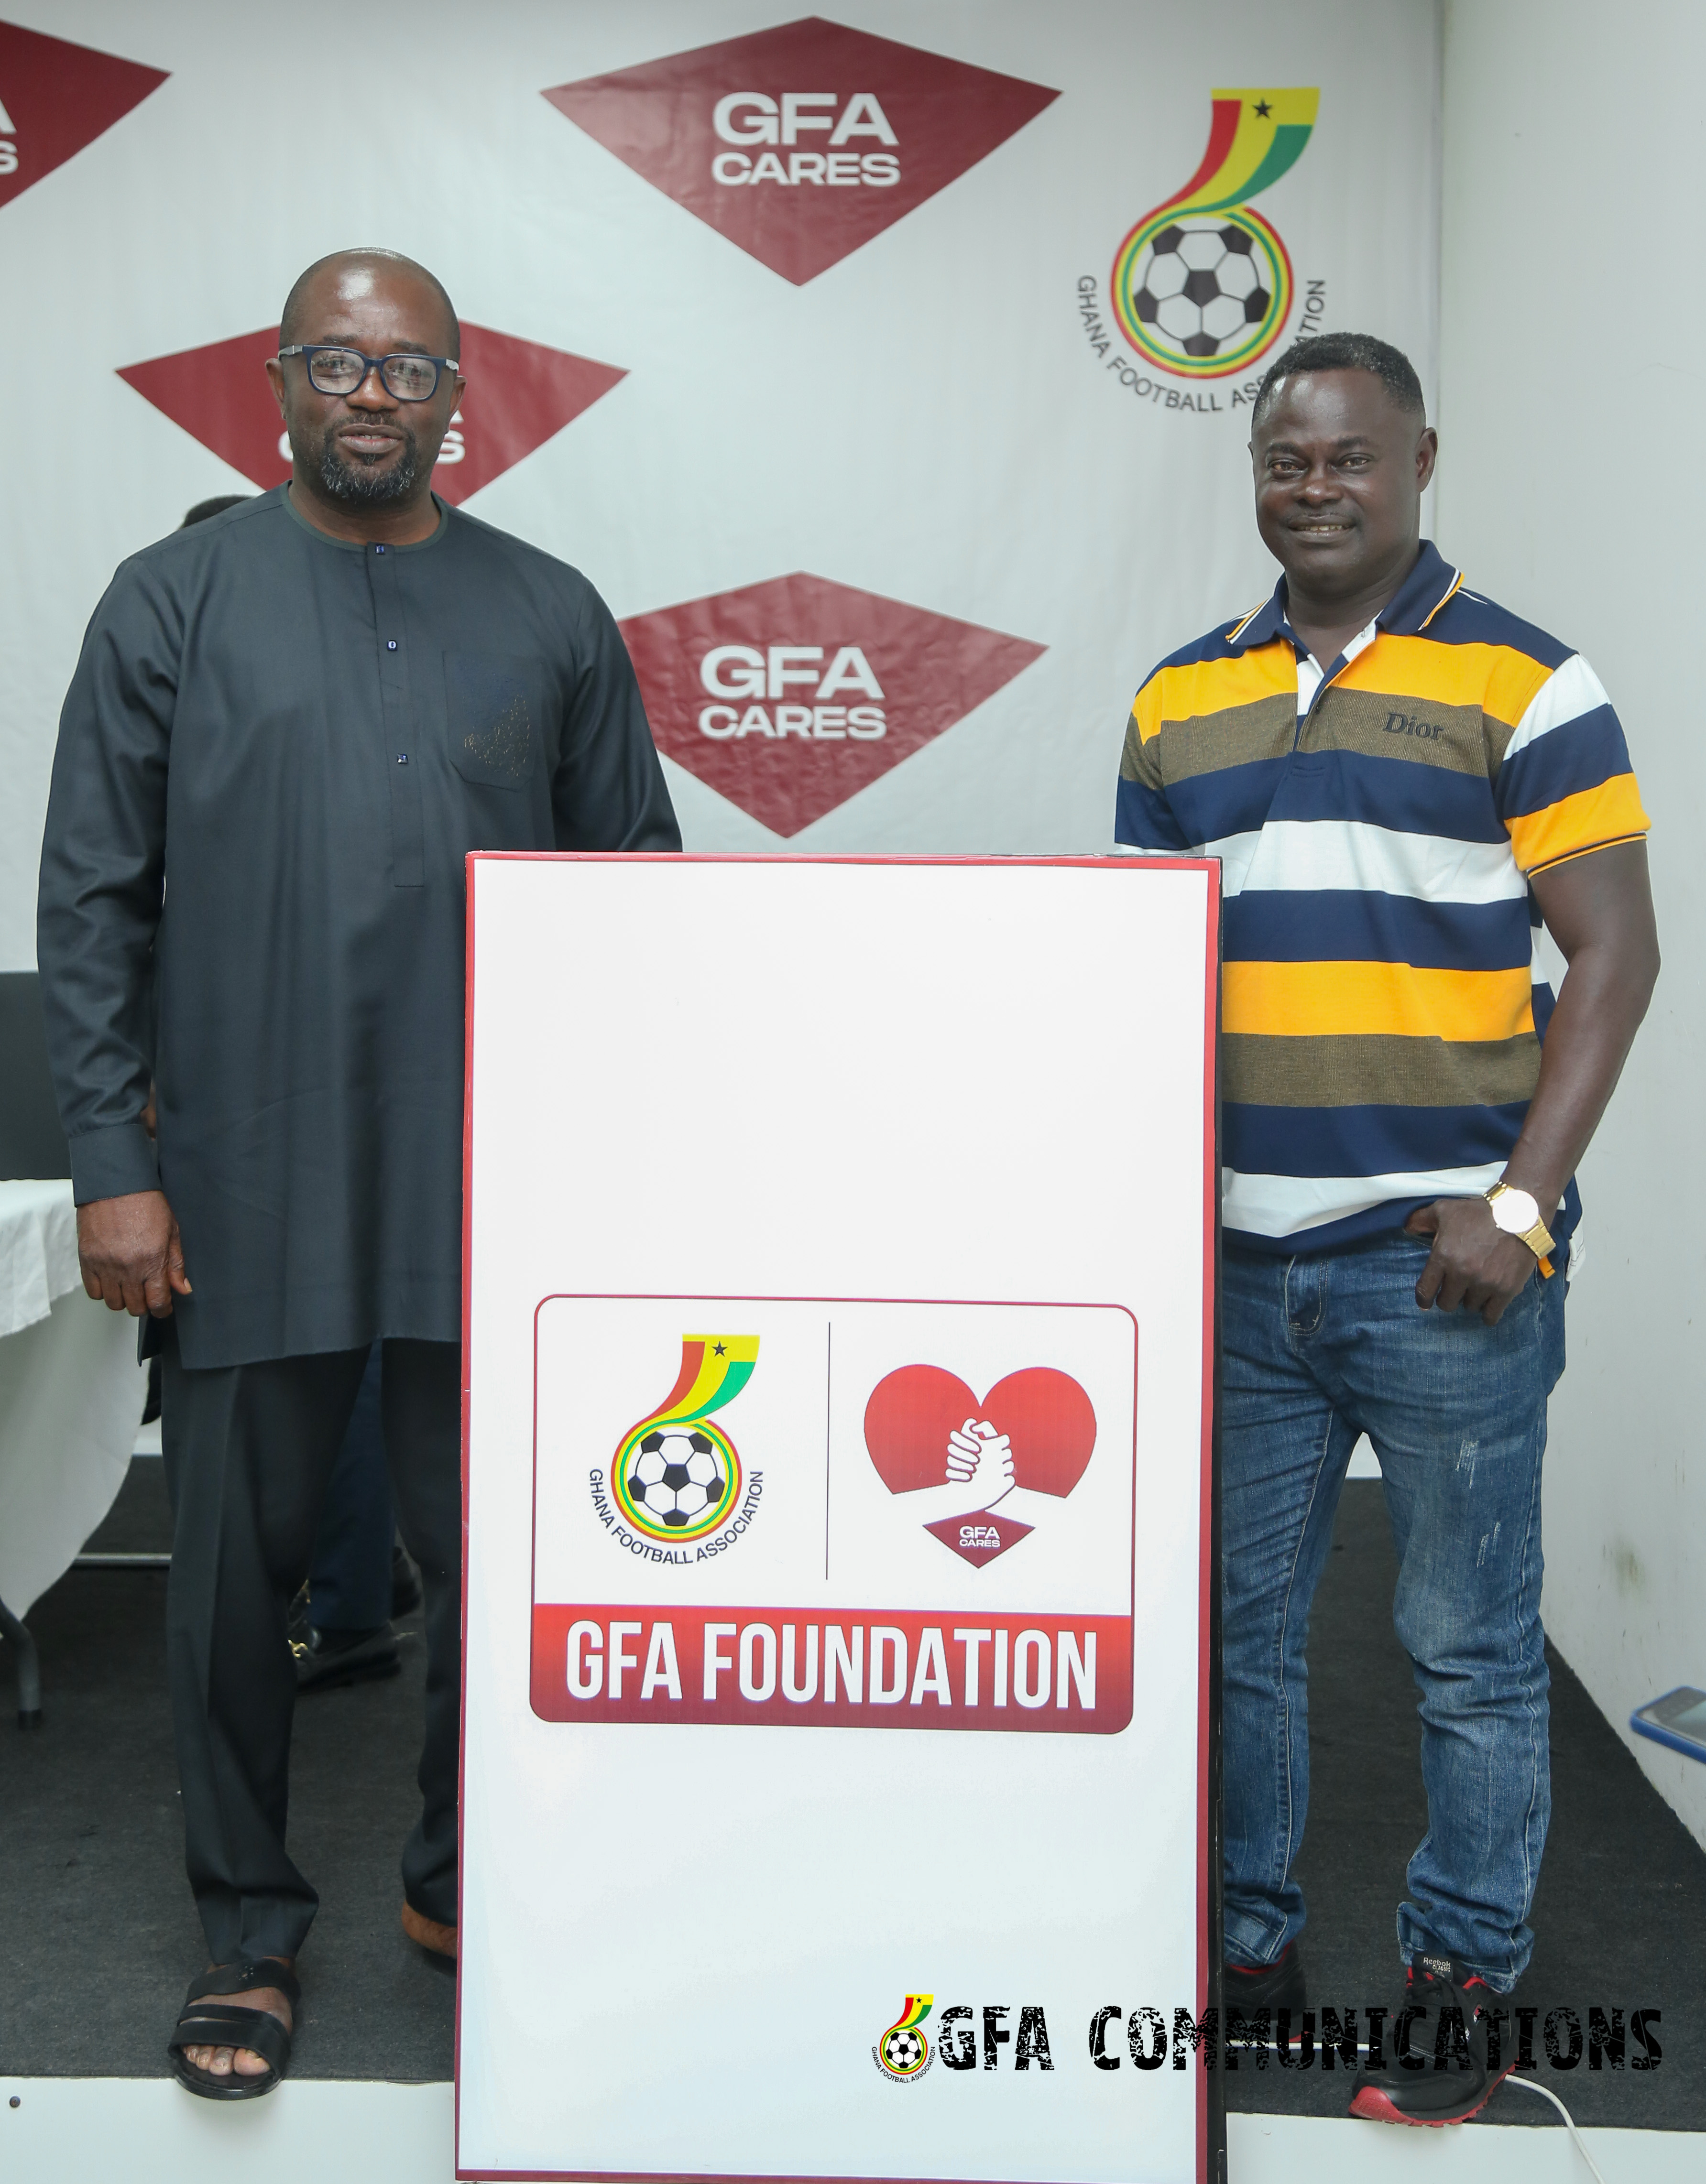 GFA Foundation officially launched in Accra